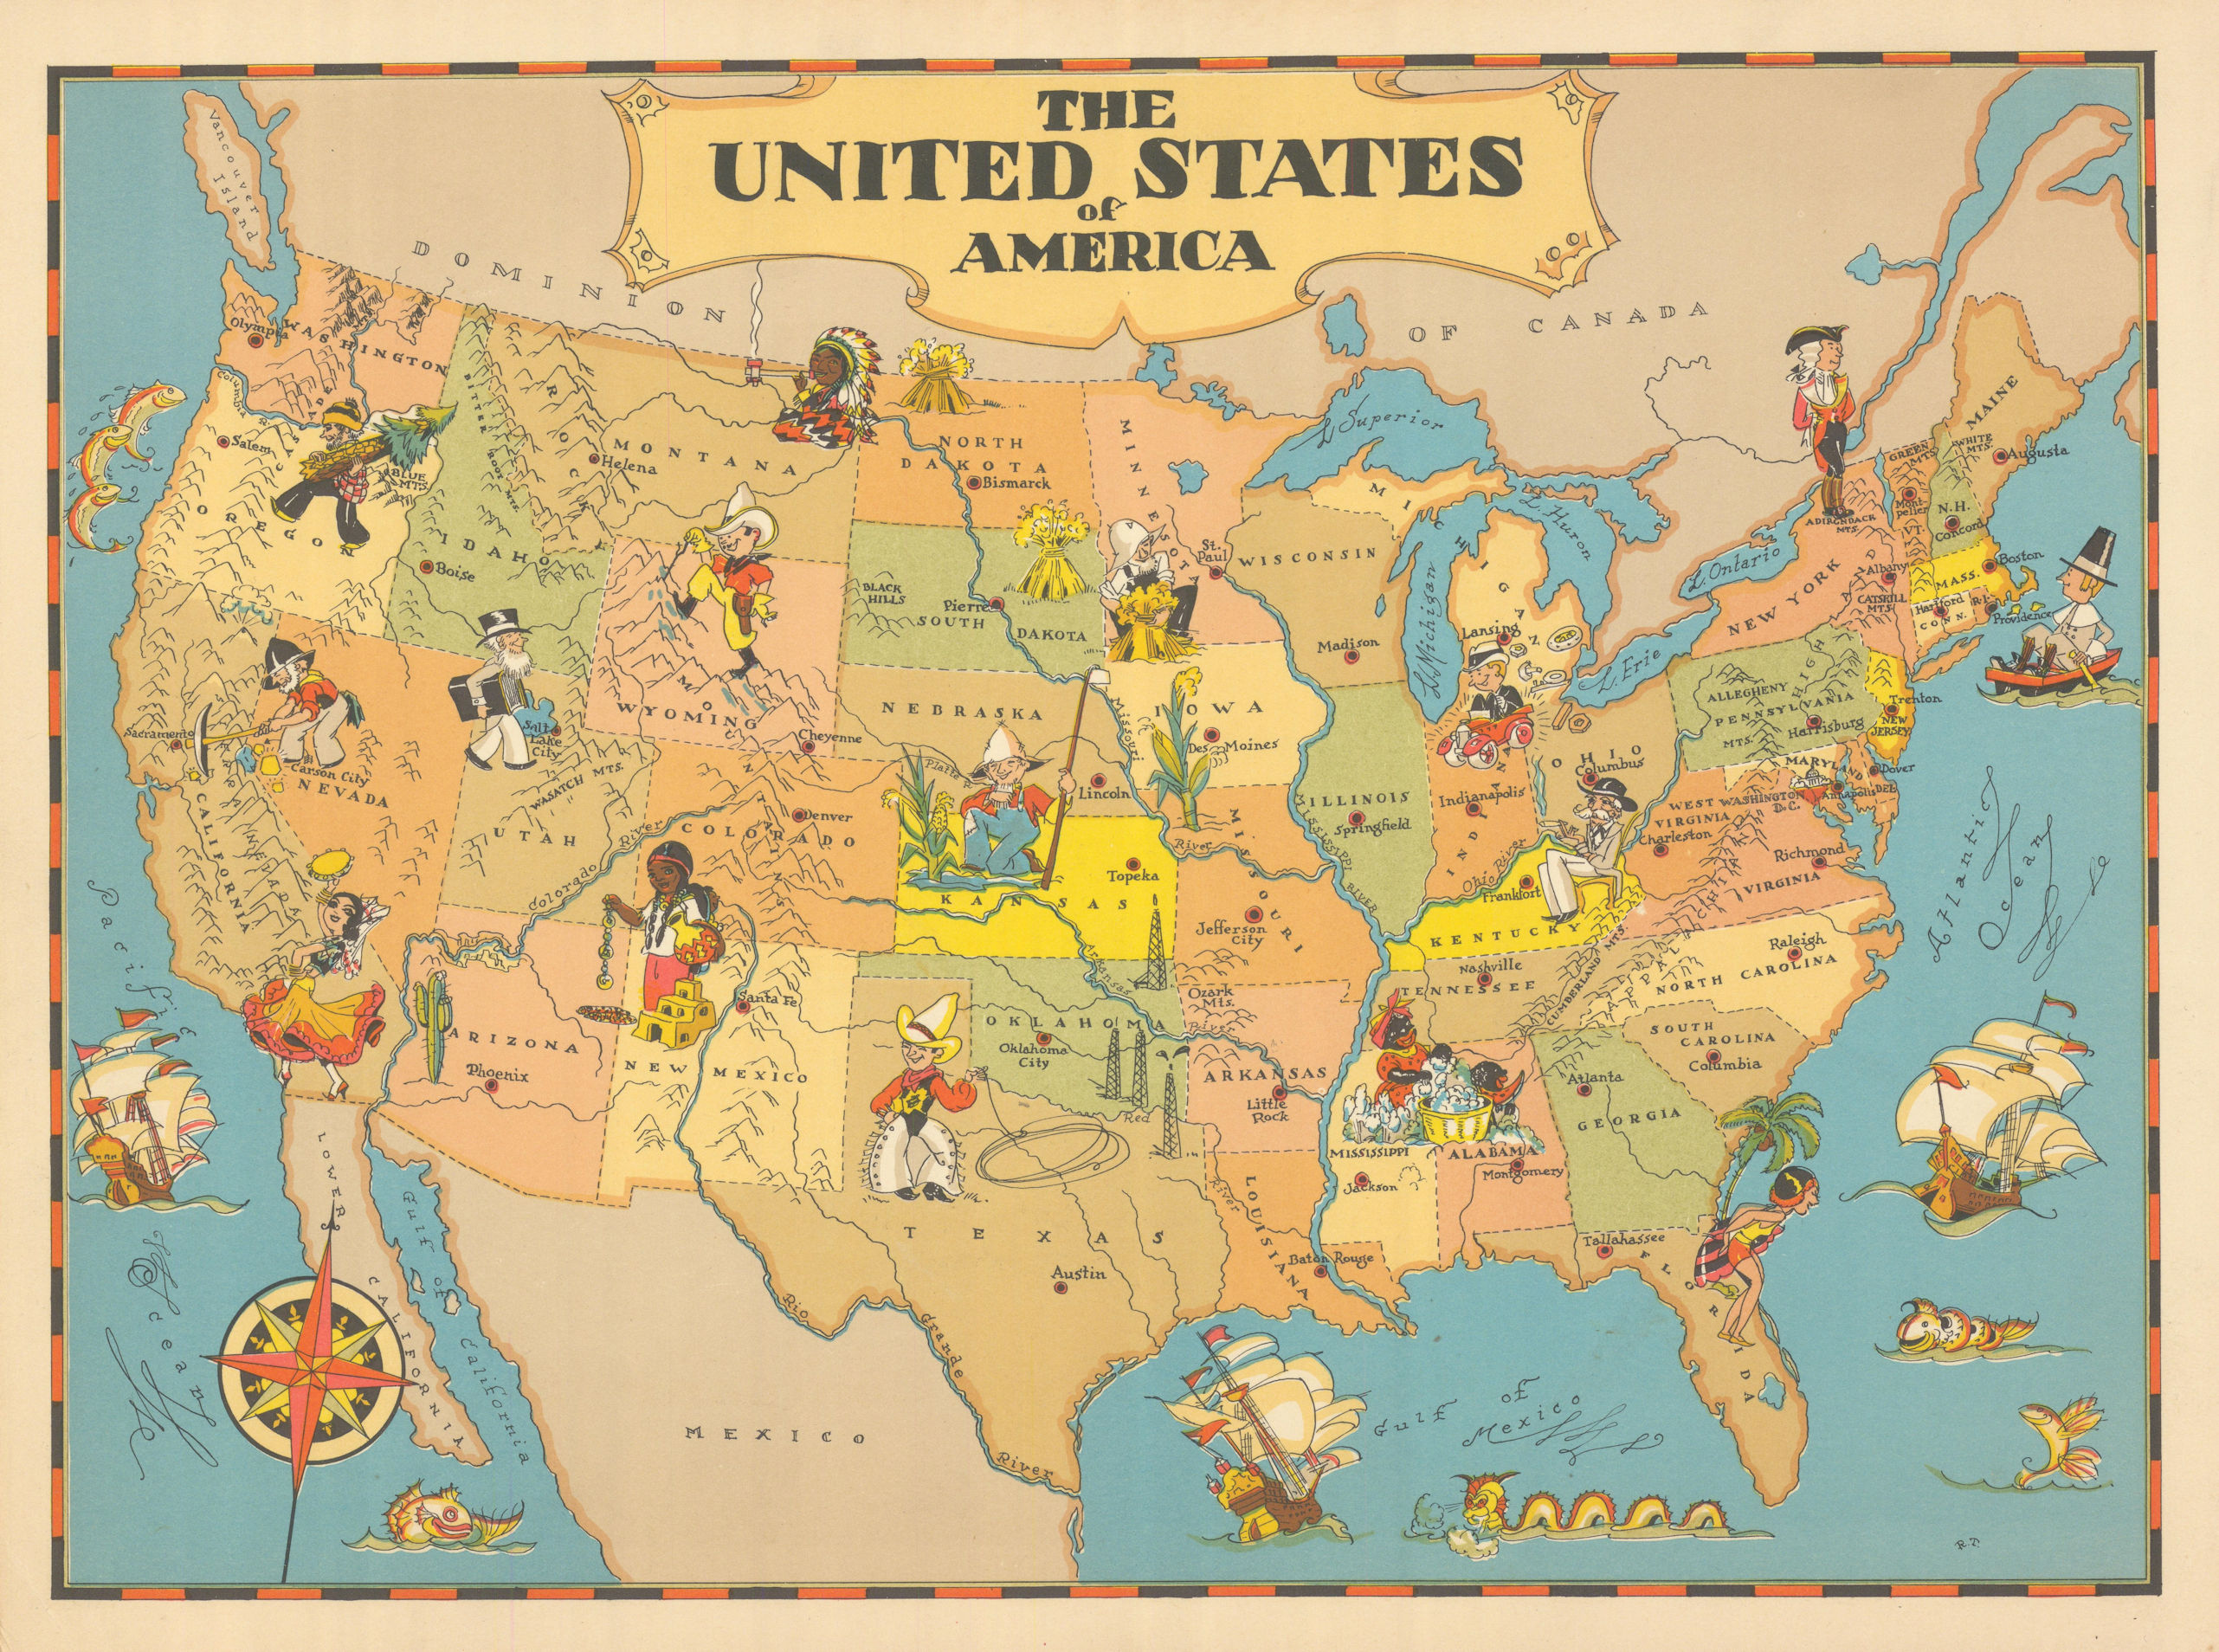 Associate Product The United States of America. Pictorial map by Ruth Taylor White 1935 old